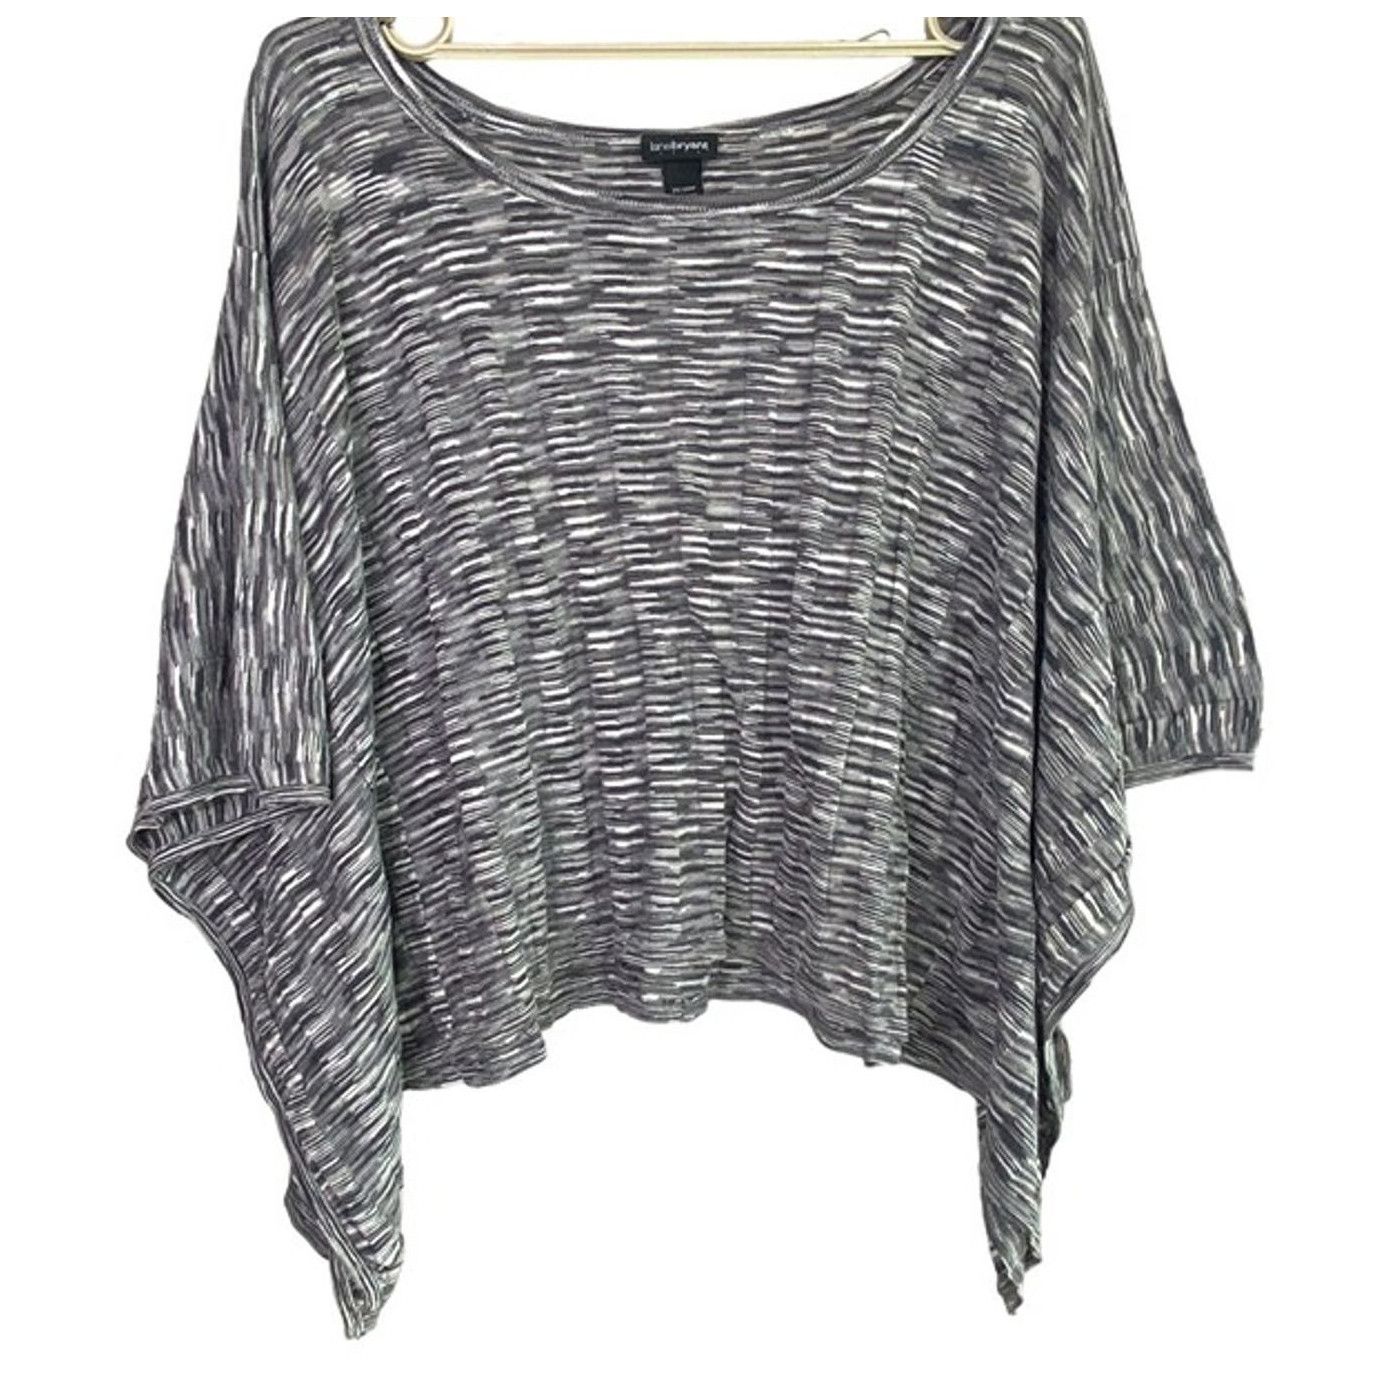 Other Lane Bryant Oversized Blouse Lightweight 26 28 Grey Black Size 4XL / US 24-26 - 1 Preview